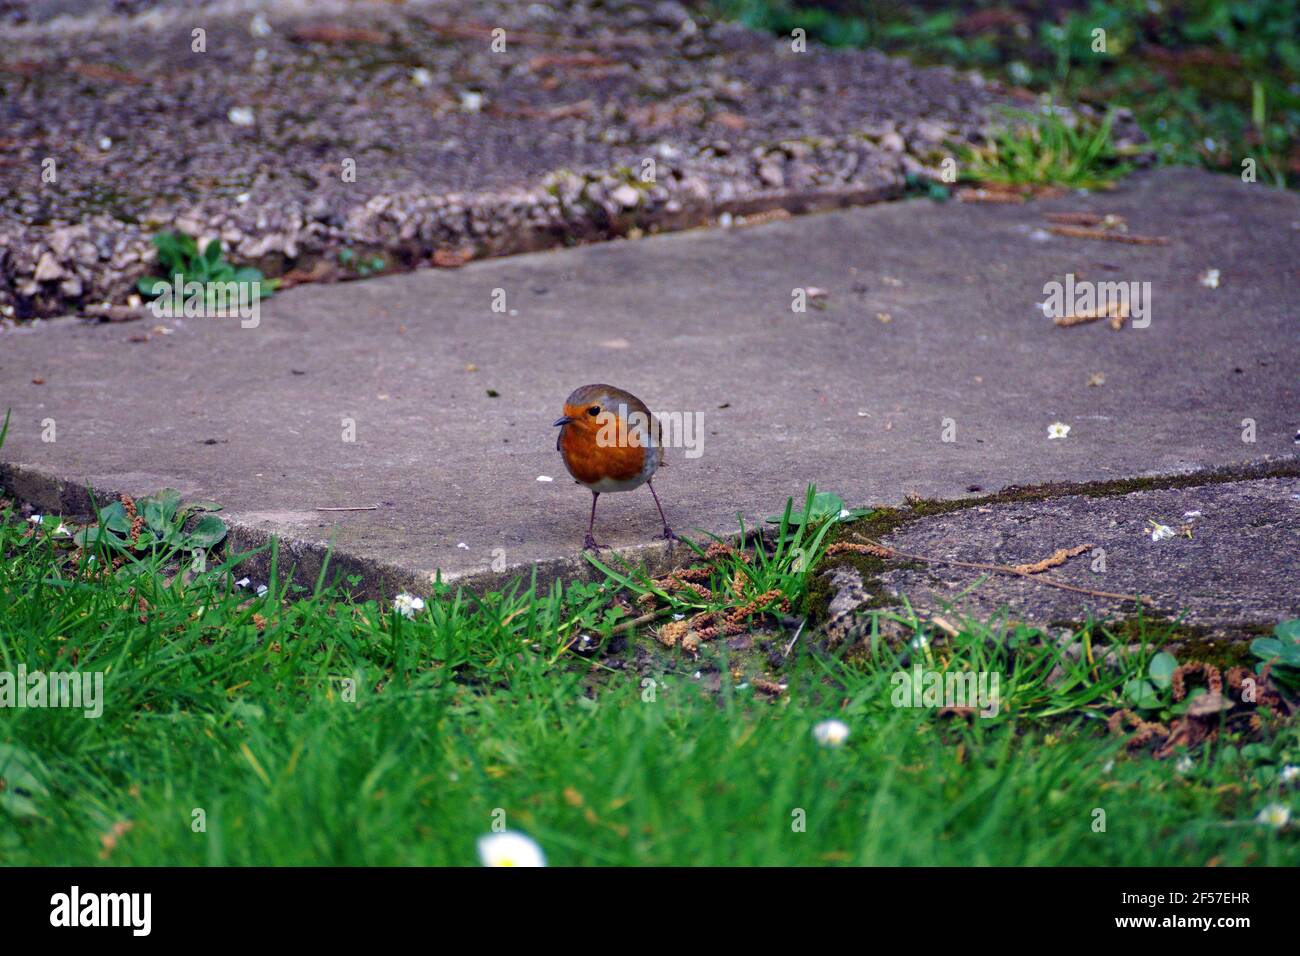 ROBIN RED BREAST MARCH 2021 Stock Photo